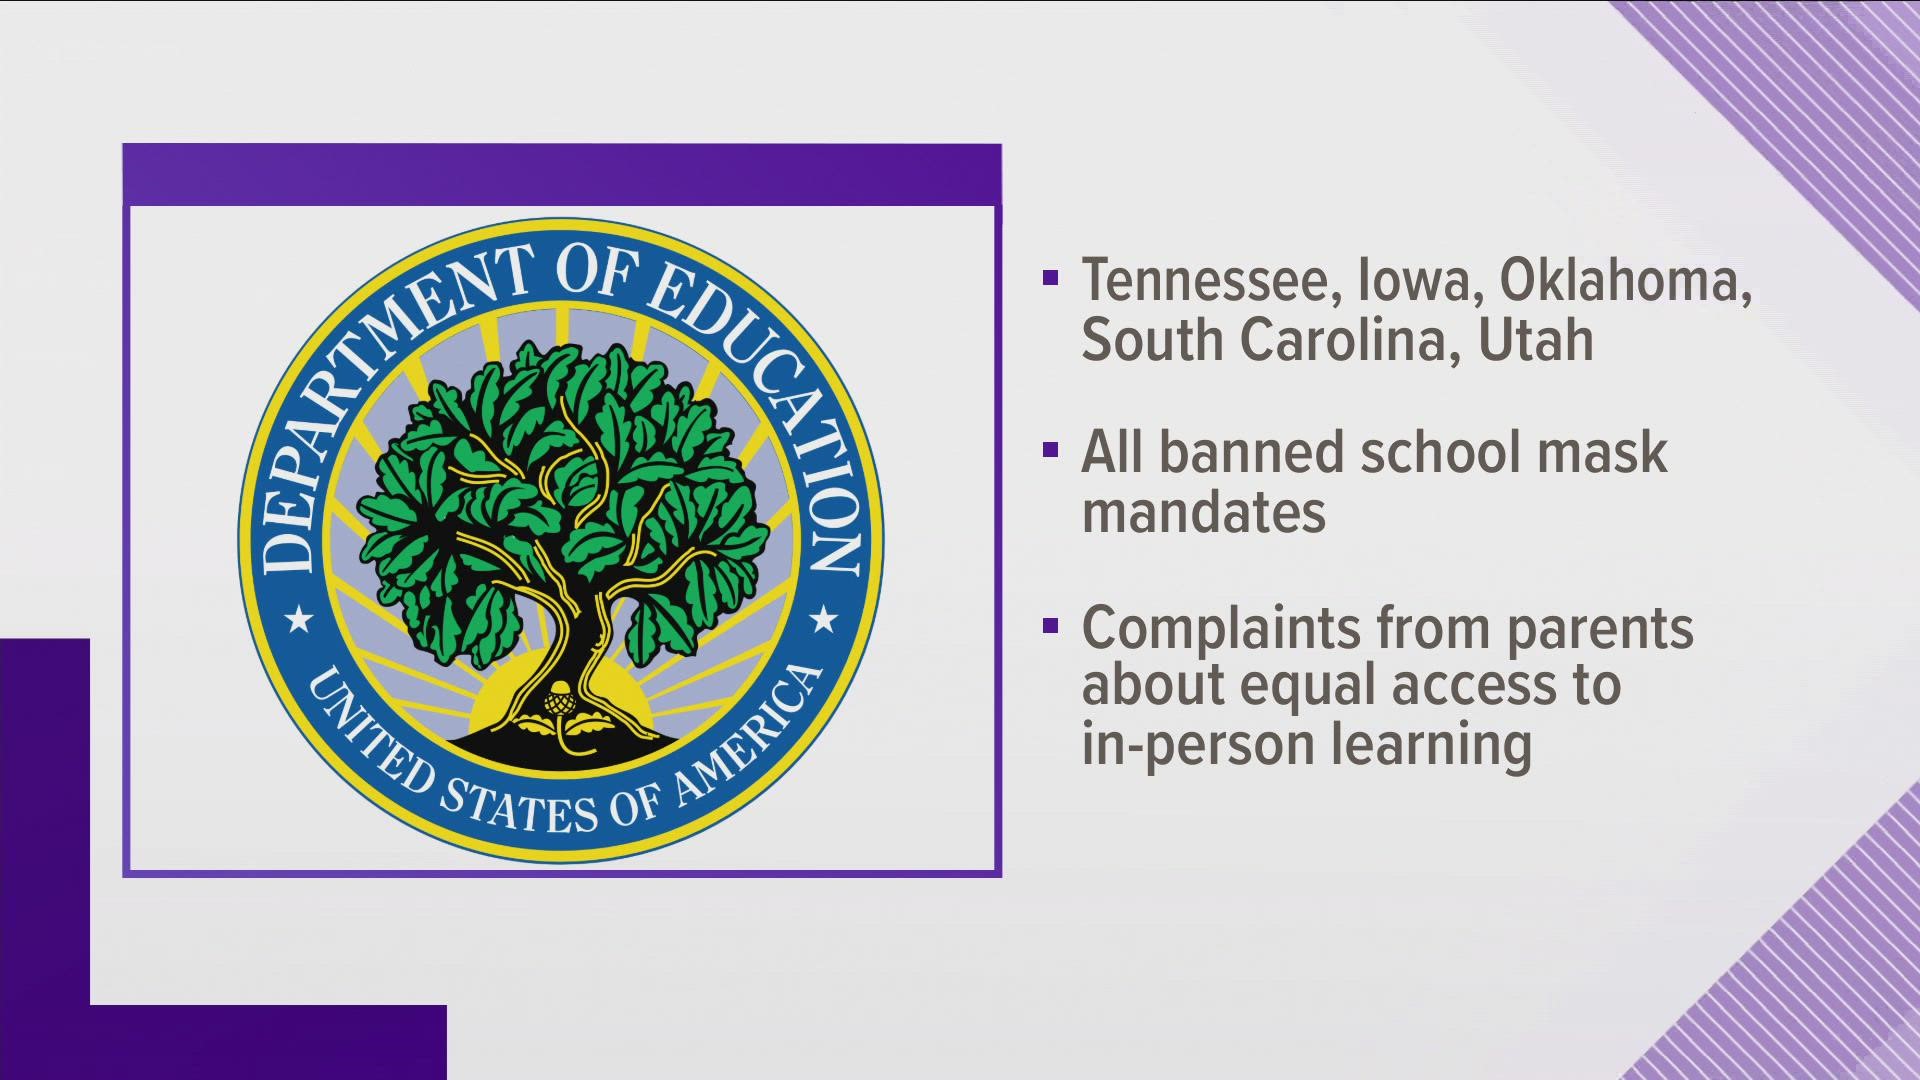 The U.S. Department of Education is opening an investigation into Tennessee and four other states over school mask mandate bans